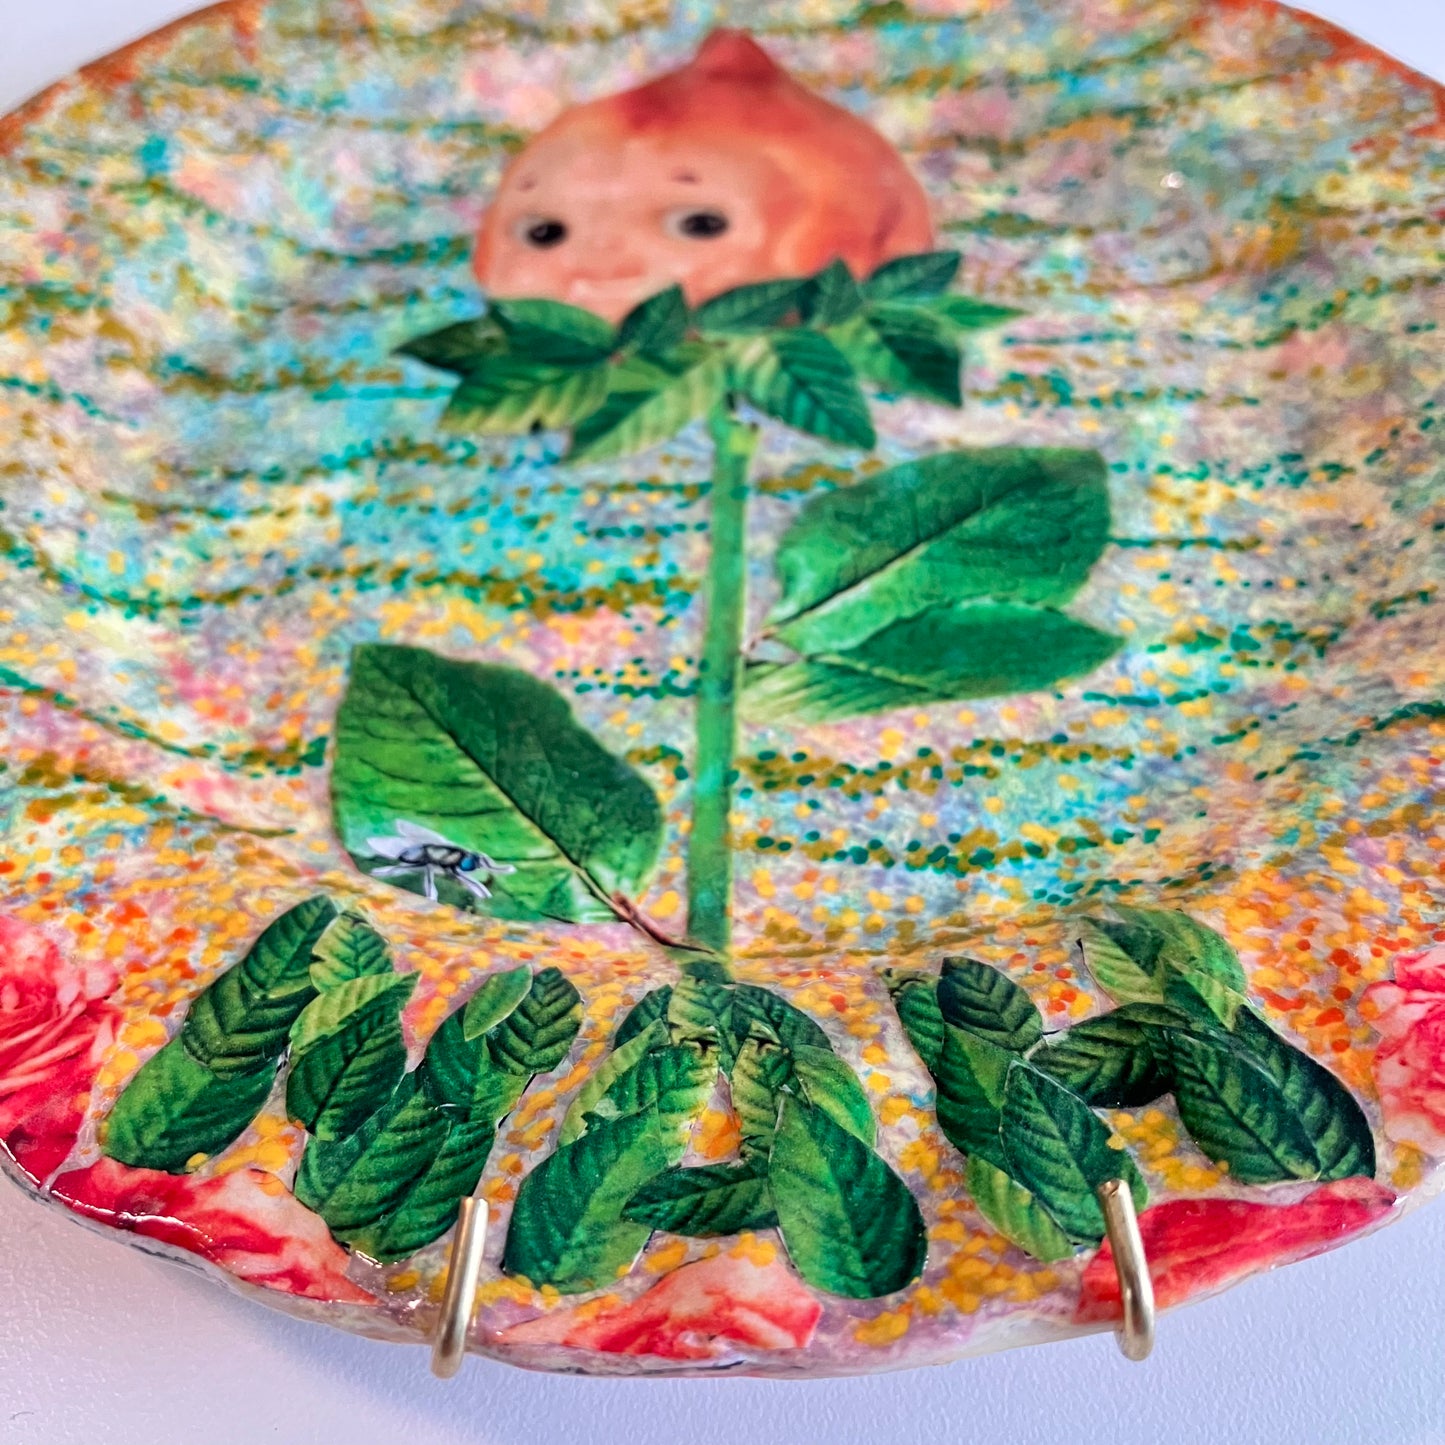 Green Upcycled Wall Plate - “Nah (Doll Flower)” - by House of Frisson